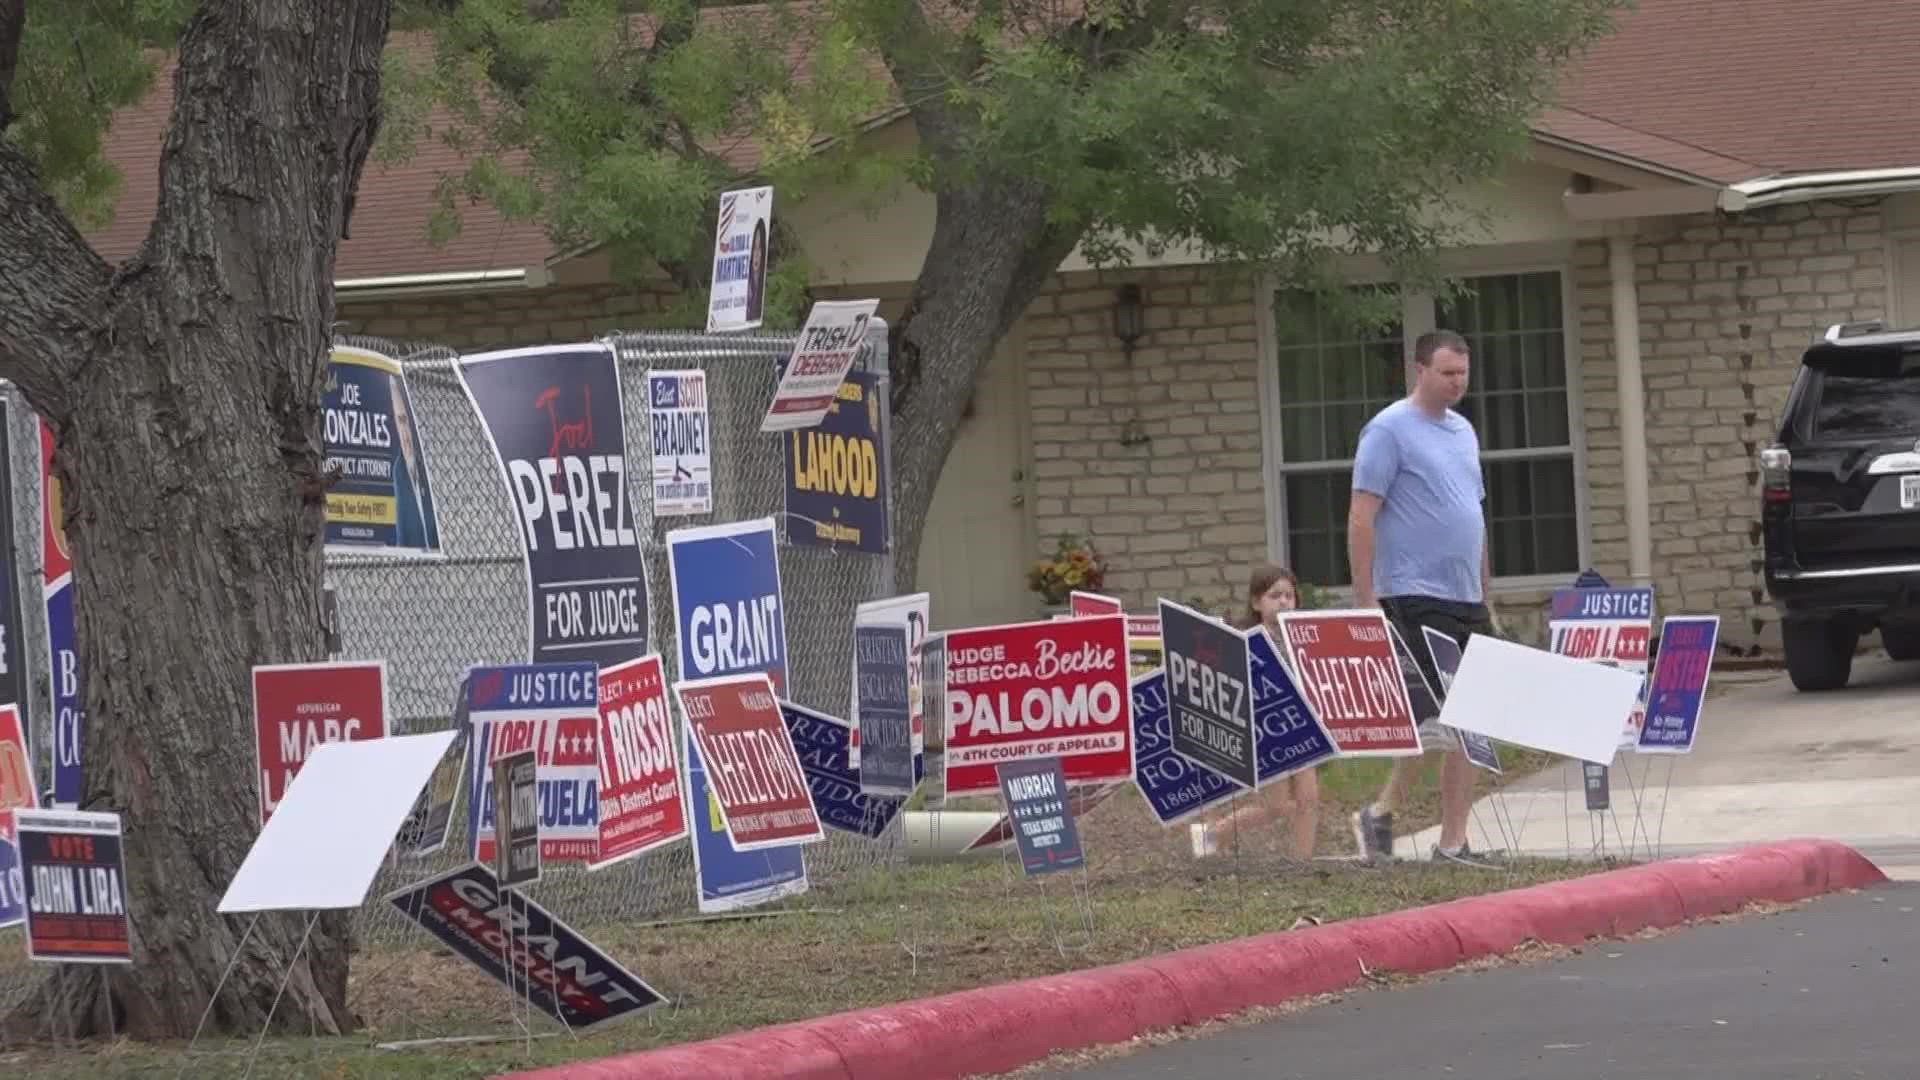 Election officials in Bexar County said that nearly 320,000 people voted early so far this year, 70,000 less than in 2018.